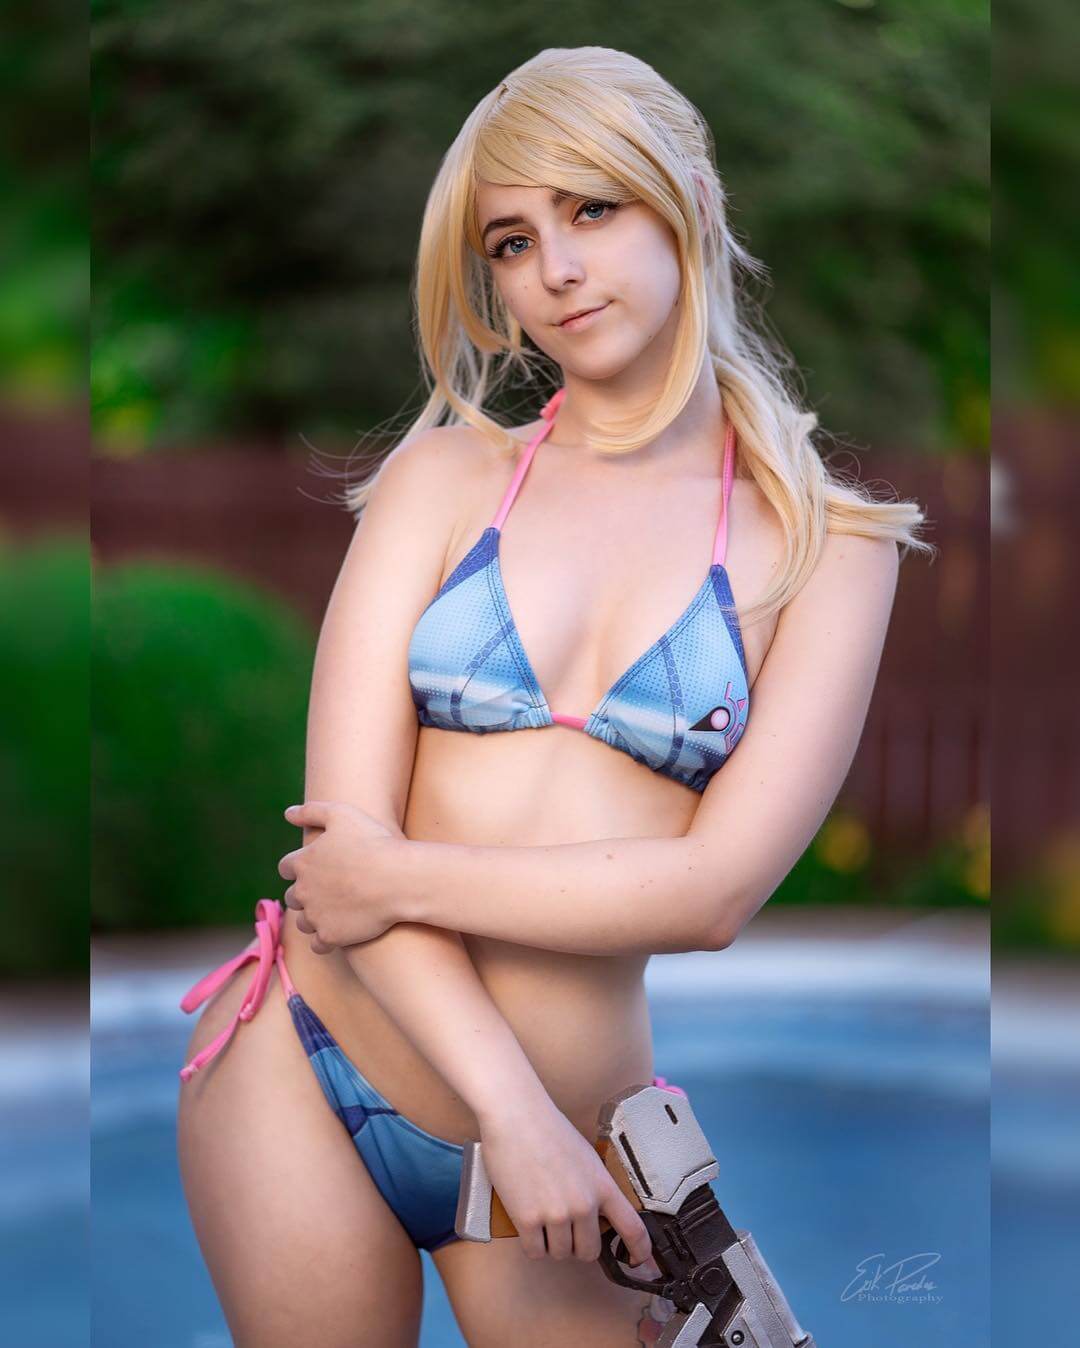 60+ Hot Pictures Of Sara Mei Kasai Explore Her Cosplay Sexiness | Best Of Comic Books